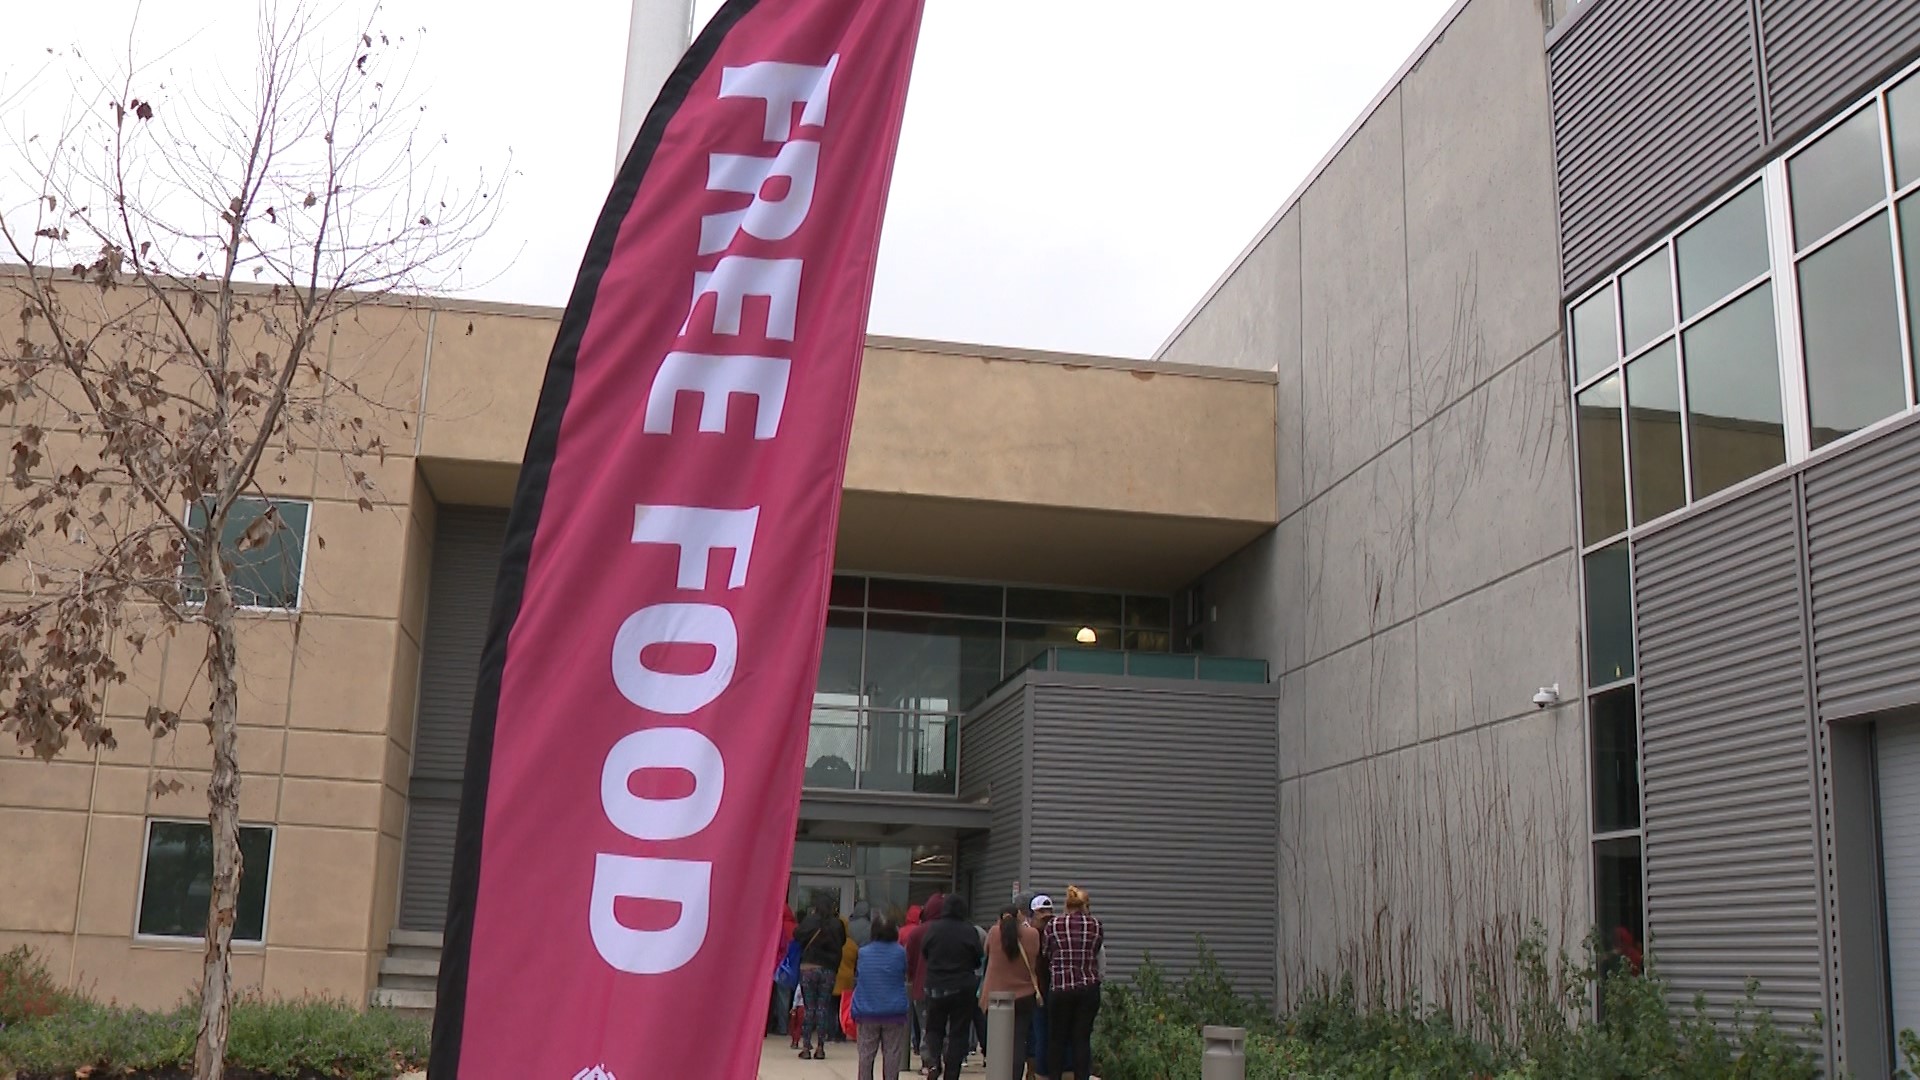 The demand for food and rent assistance is surging in Austin. KVUE spoke with residents getting help to learn how important these resources are.